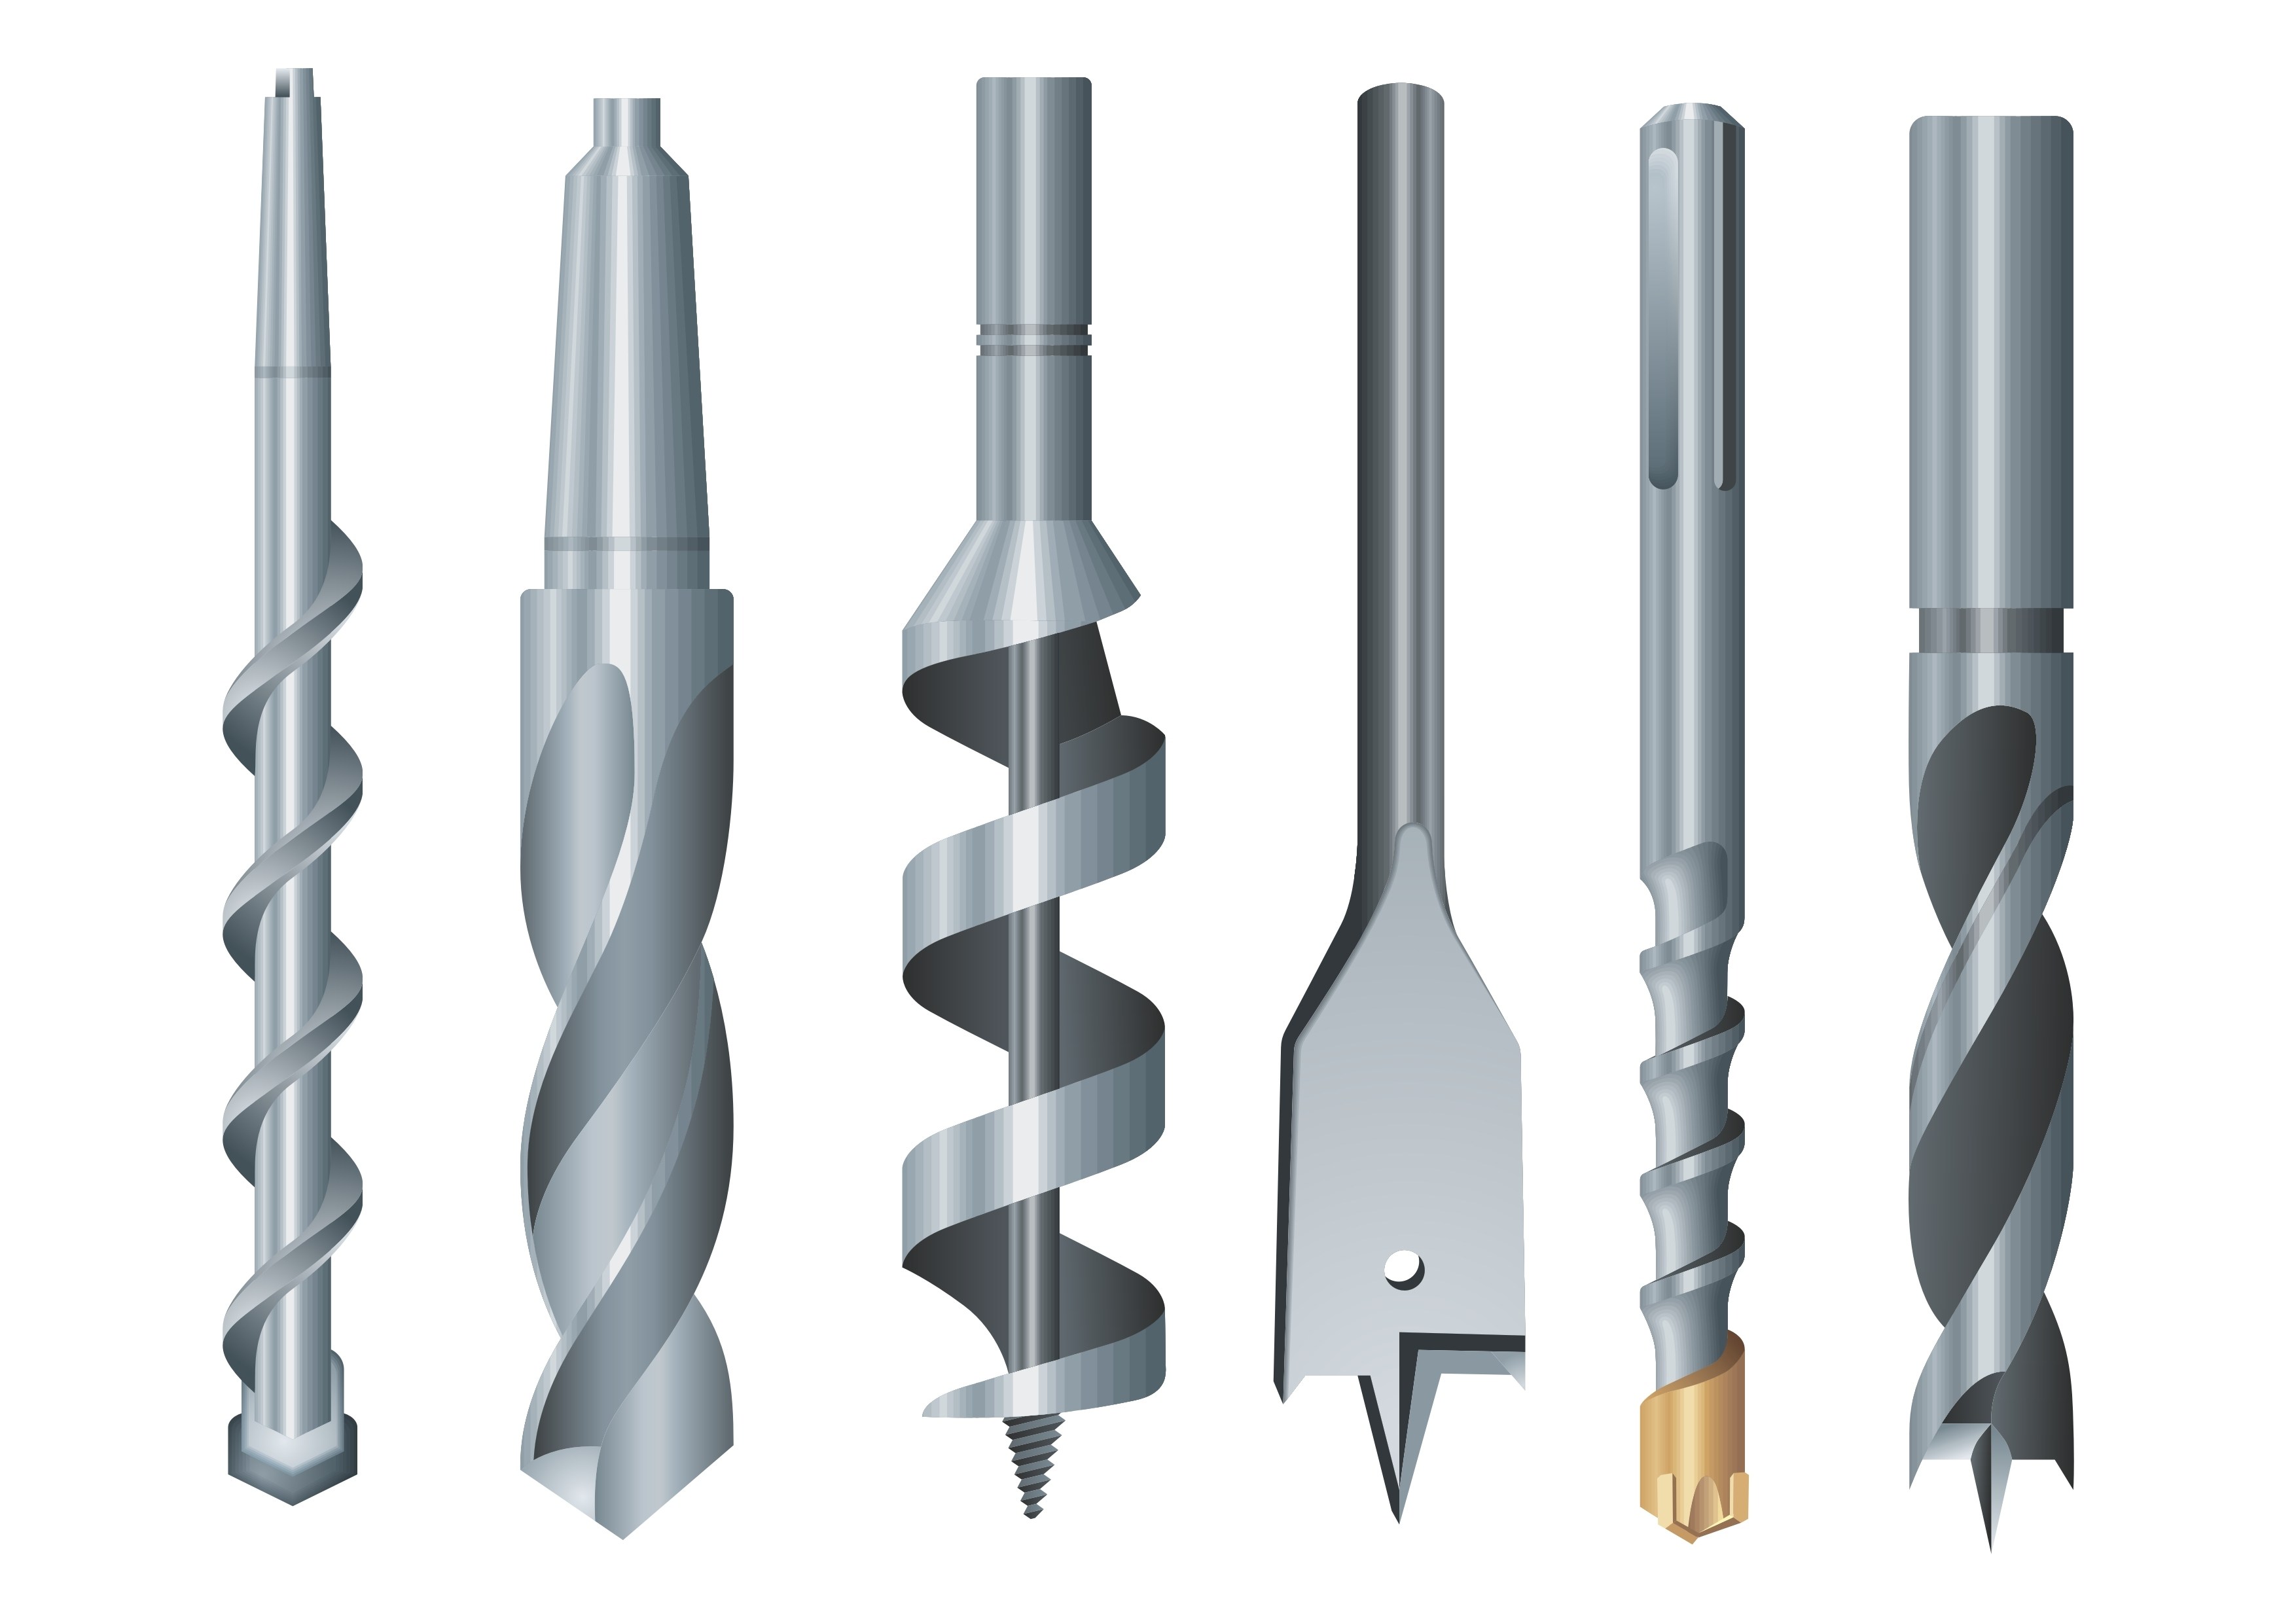 Choosing the Right Manufacturing Drill Bit for the Job